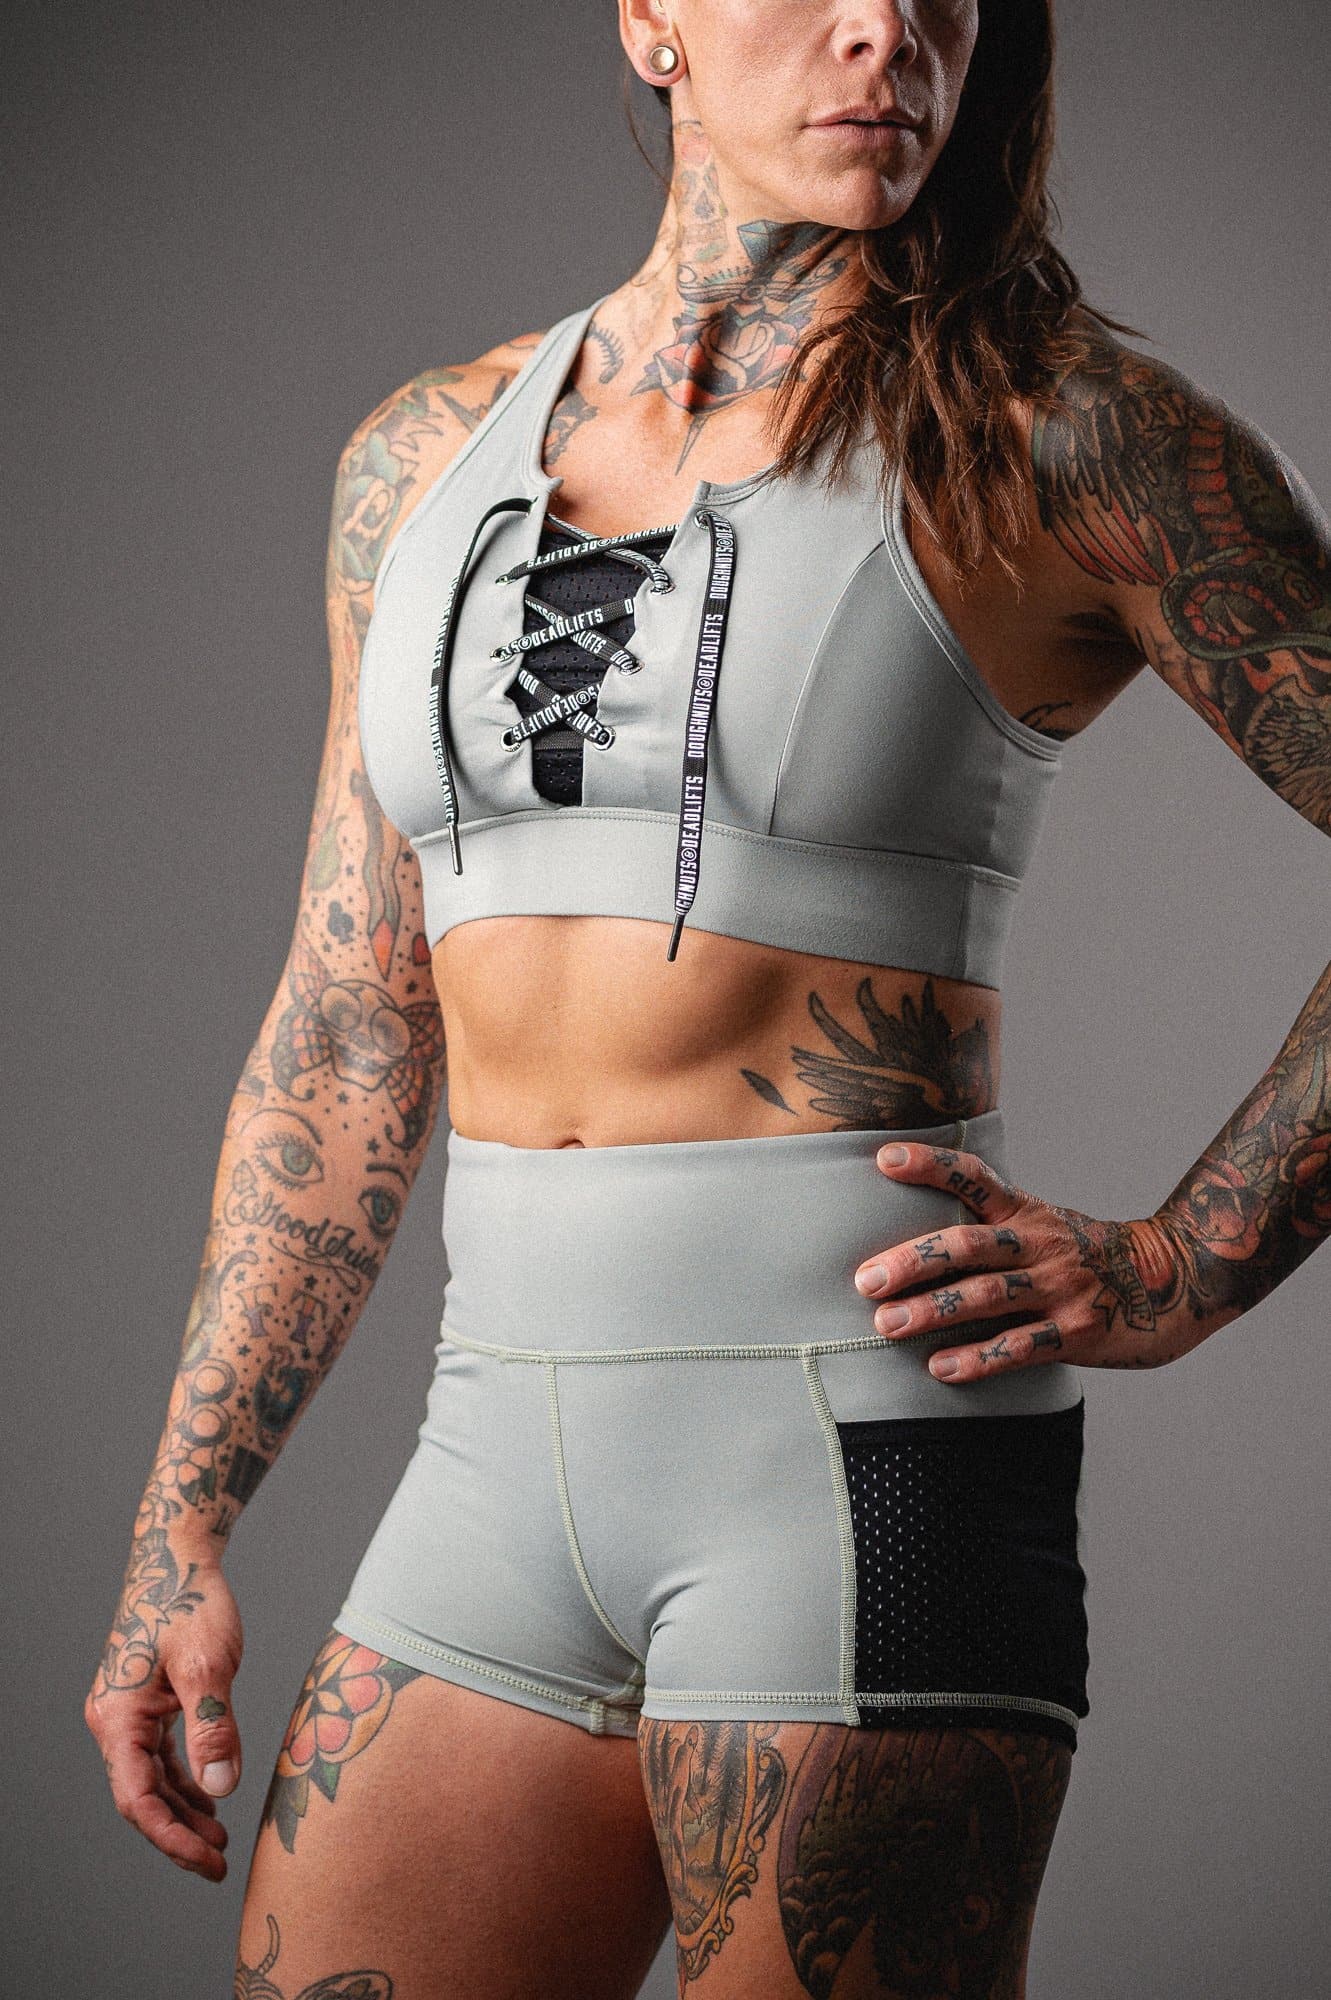 Doughnuts & Deadlifts EMPOWER Action Sports Bra (Jade) - 9 for 9